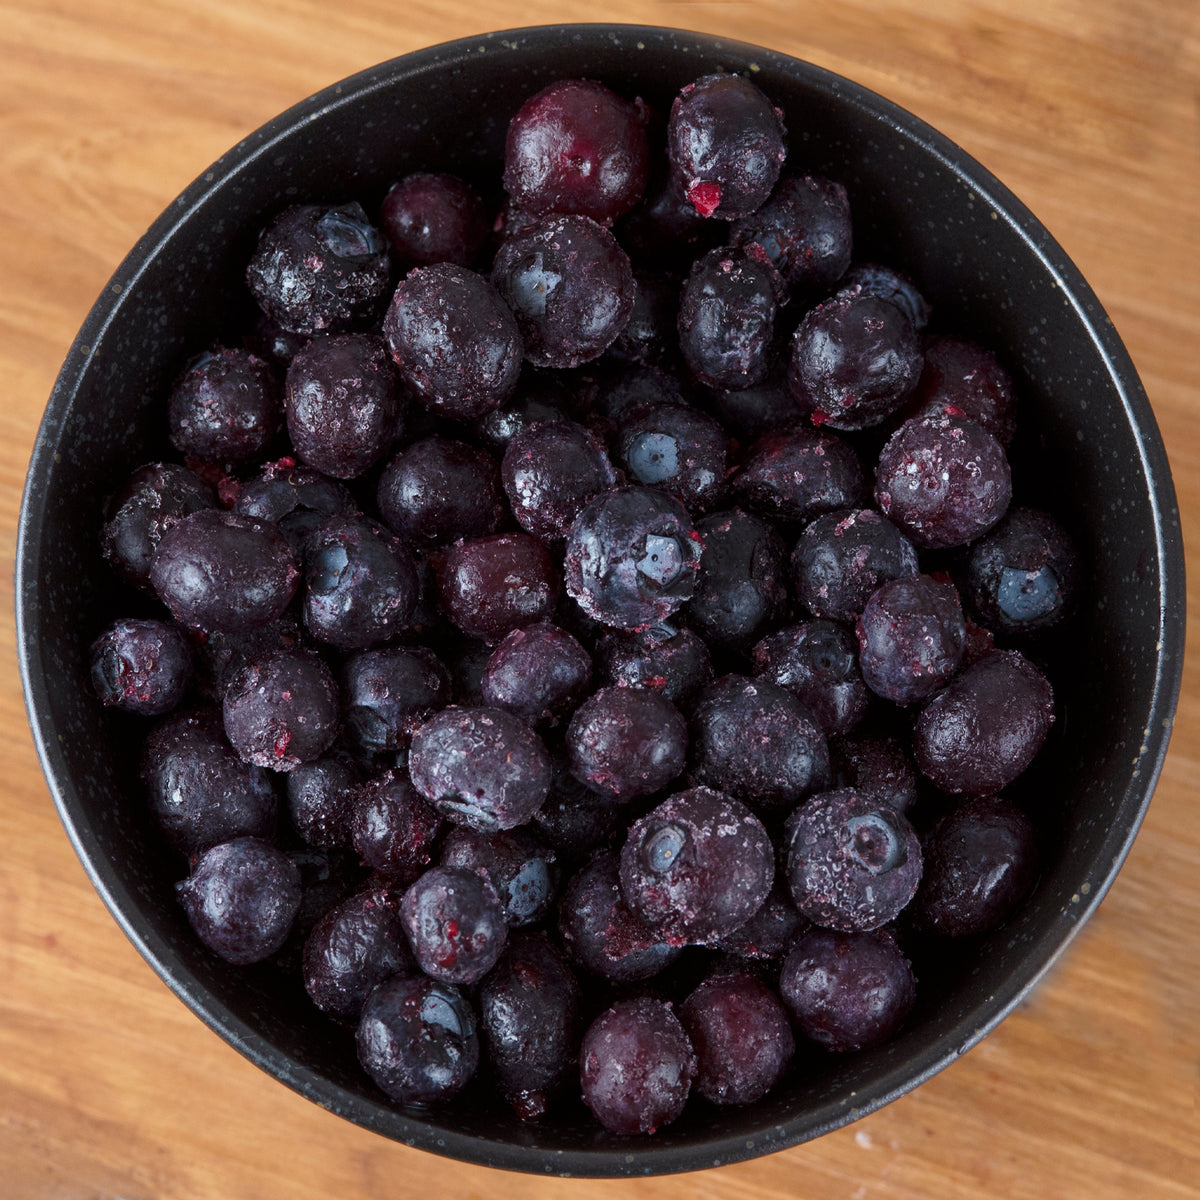 Certified Organic Frozen Blueberries from the USA (1kg) - Horizon Farms